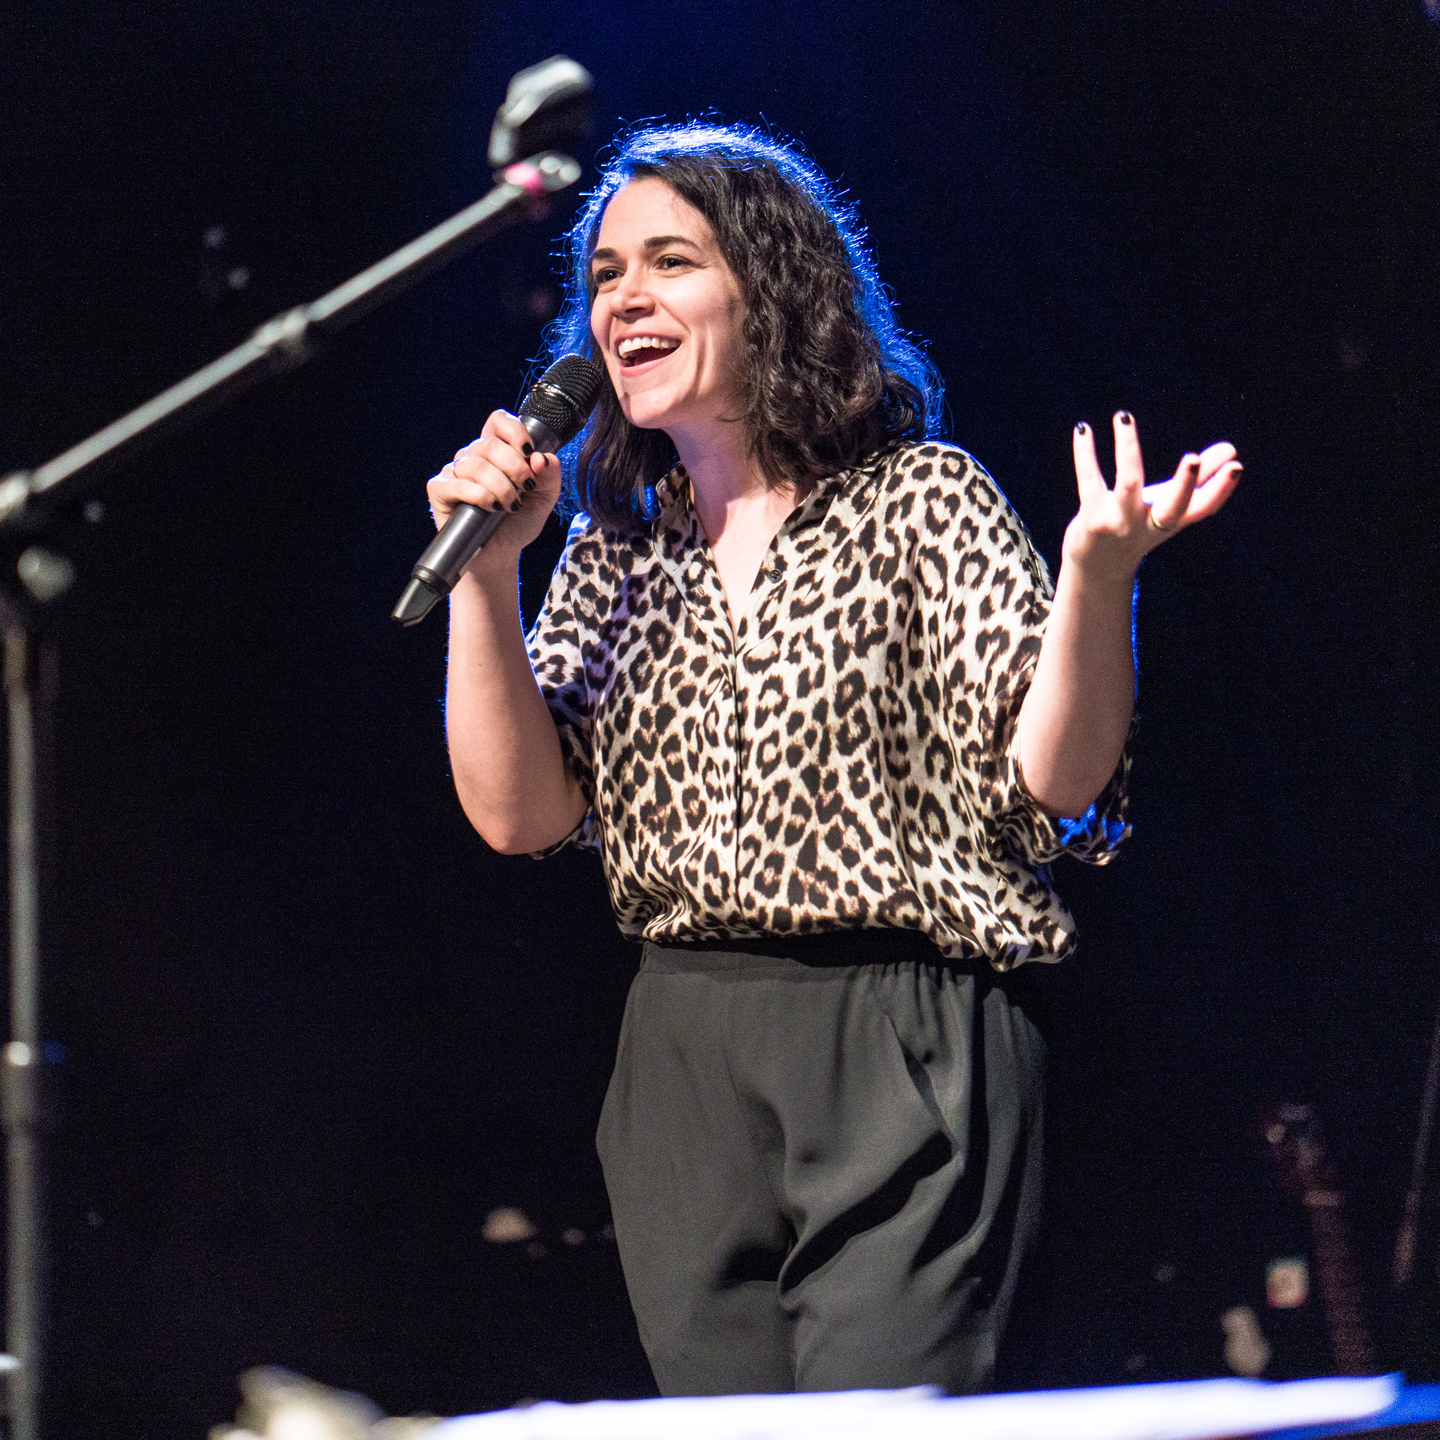 Abbi Jacobson at the 420 Show with Matt Besser – Photo by Stephen Olker